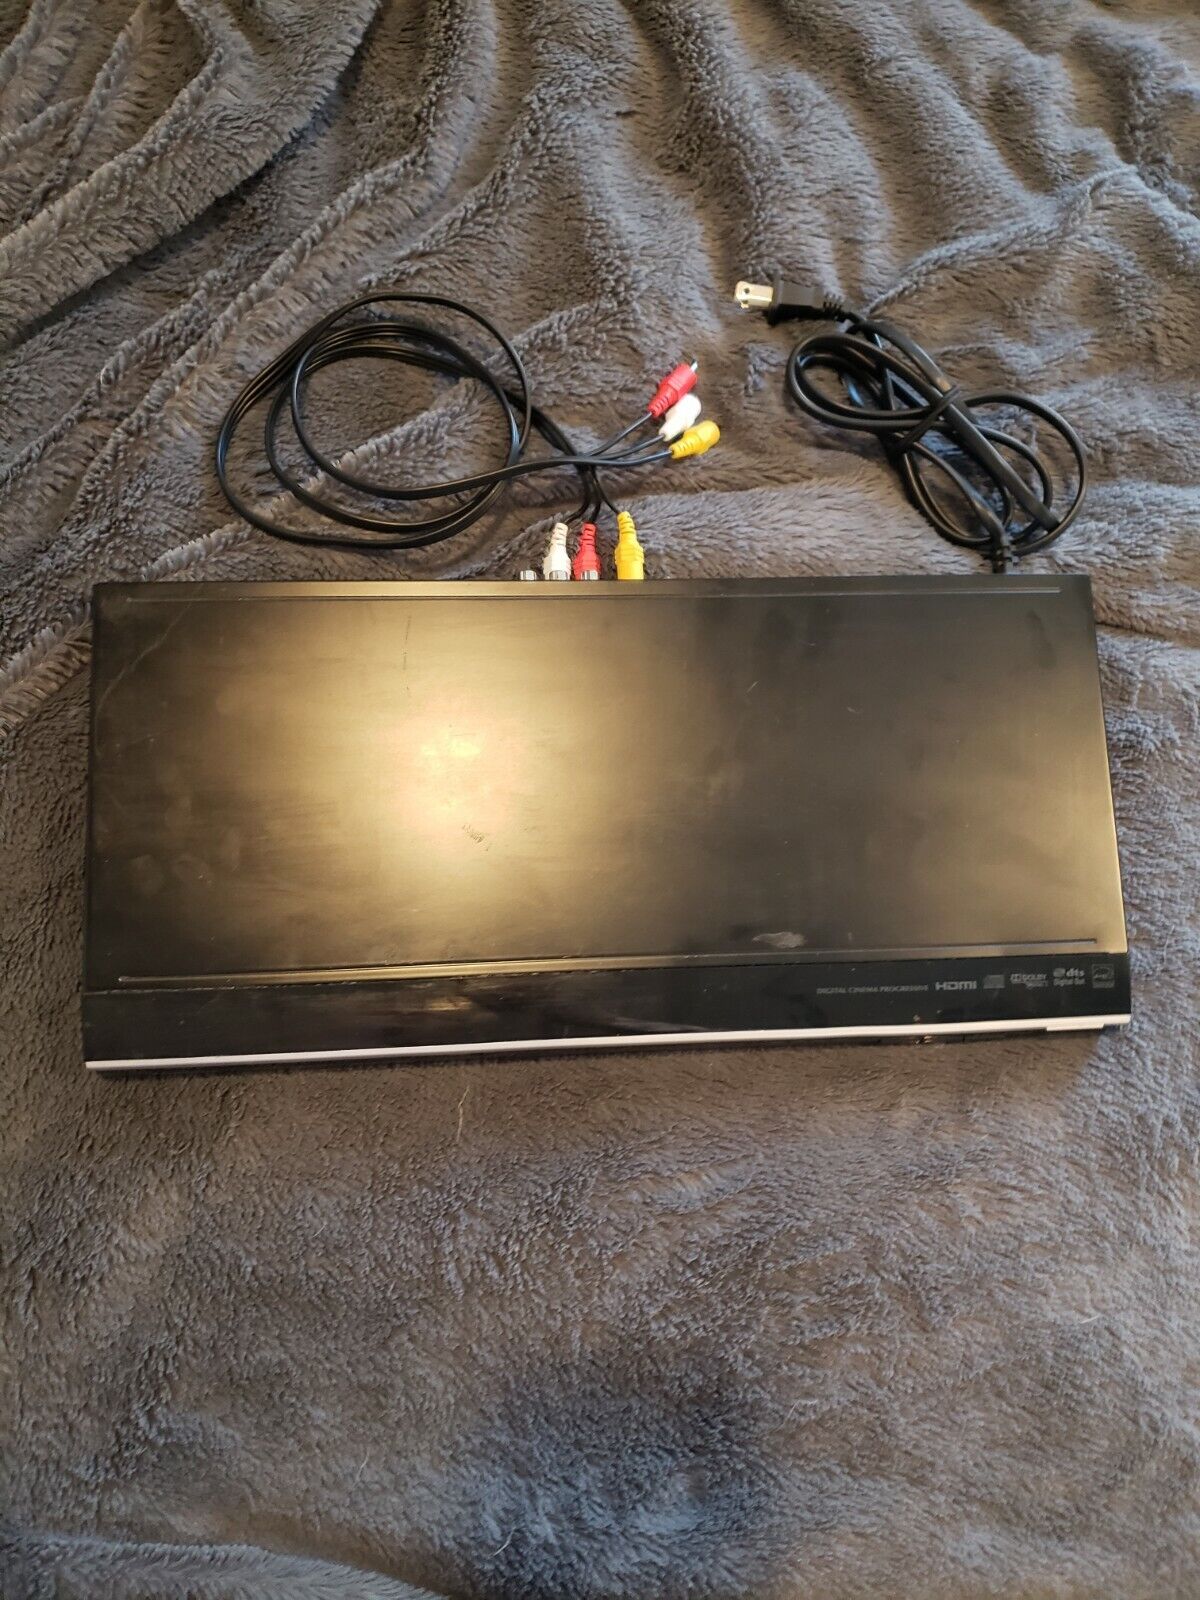 Toshiba DVD player w/ normal wear and tear. No remote.